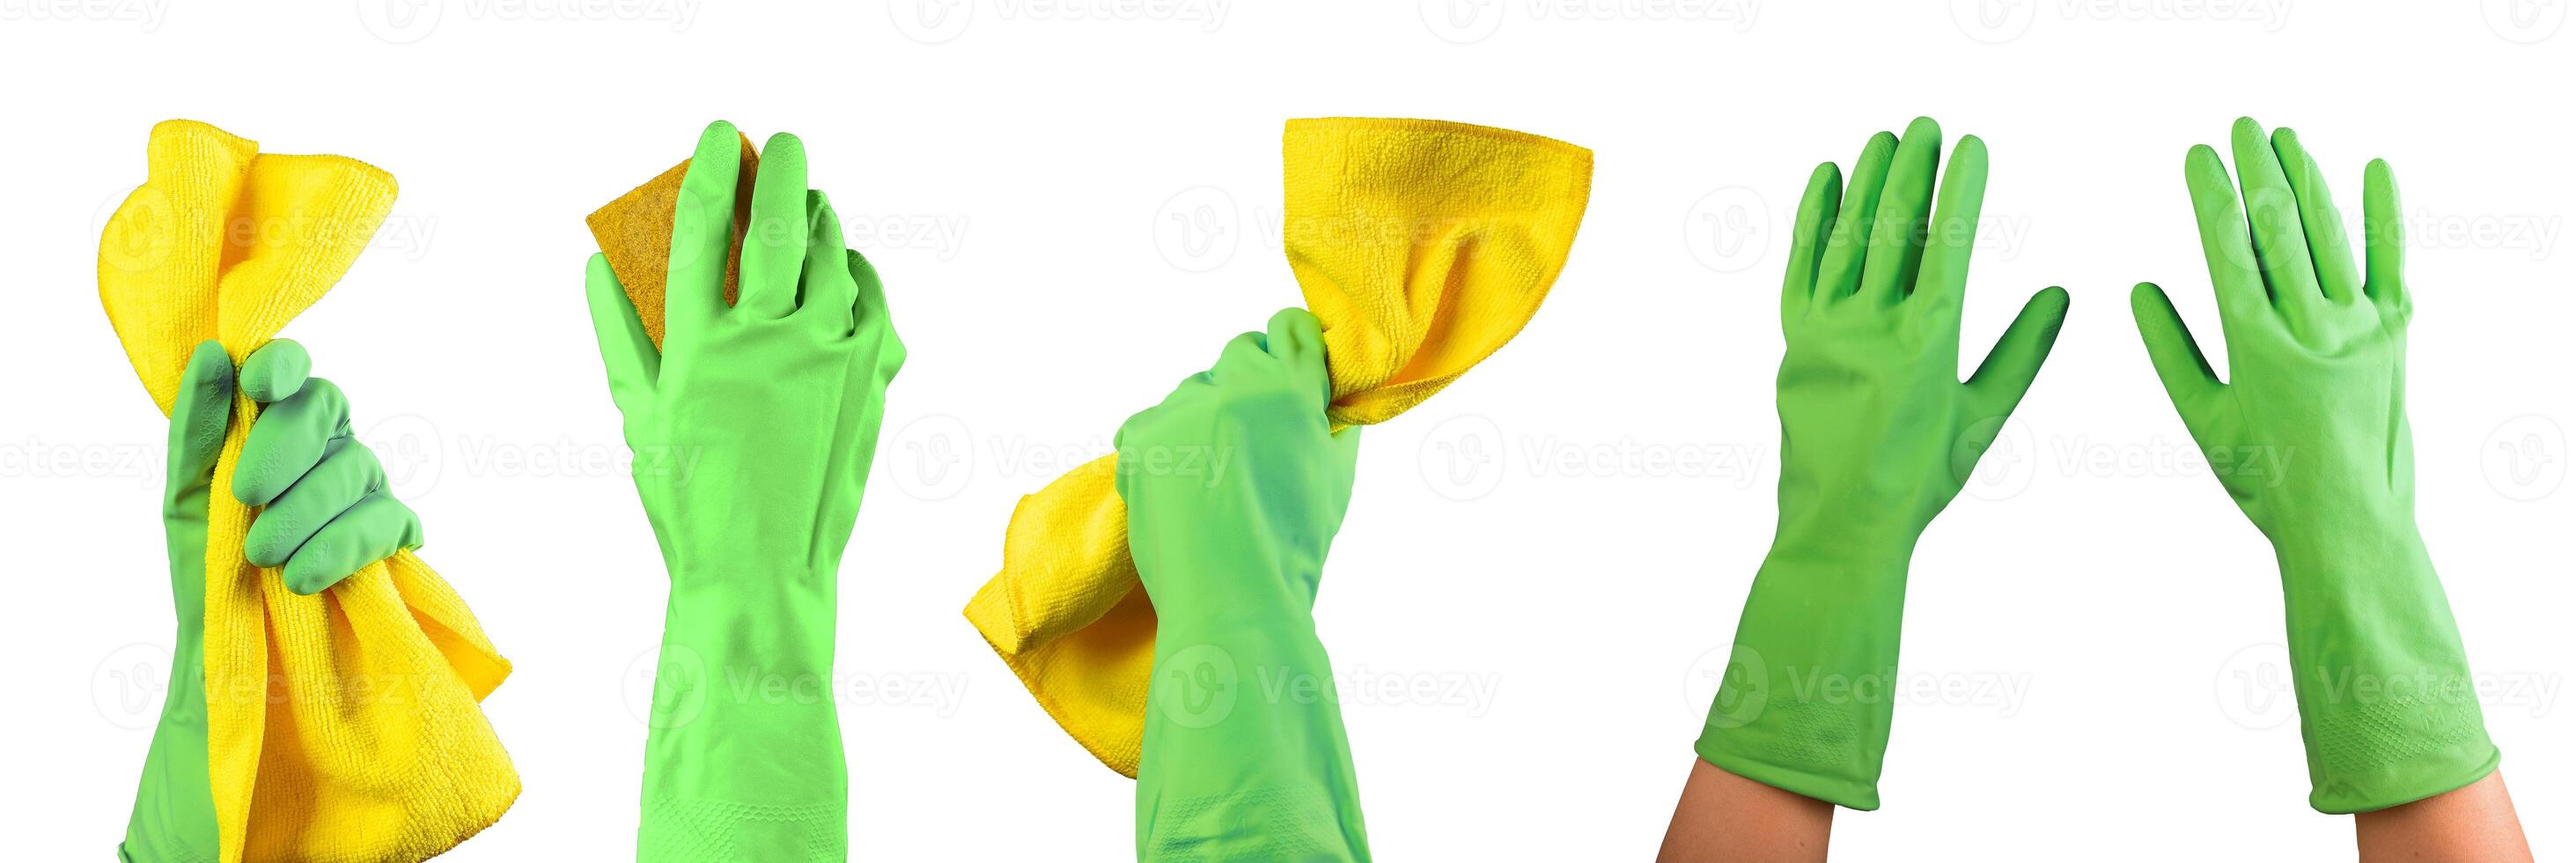 Hand in green gloves holding yellow cleaning polishing microfiber wiper set, isolated on white photo